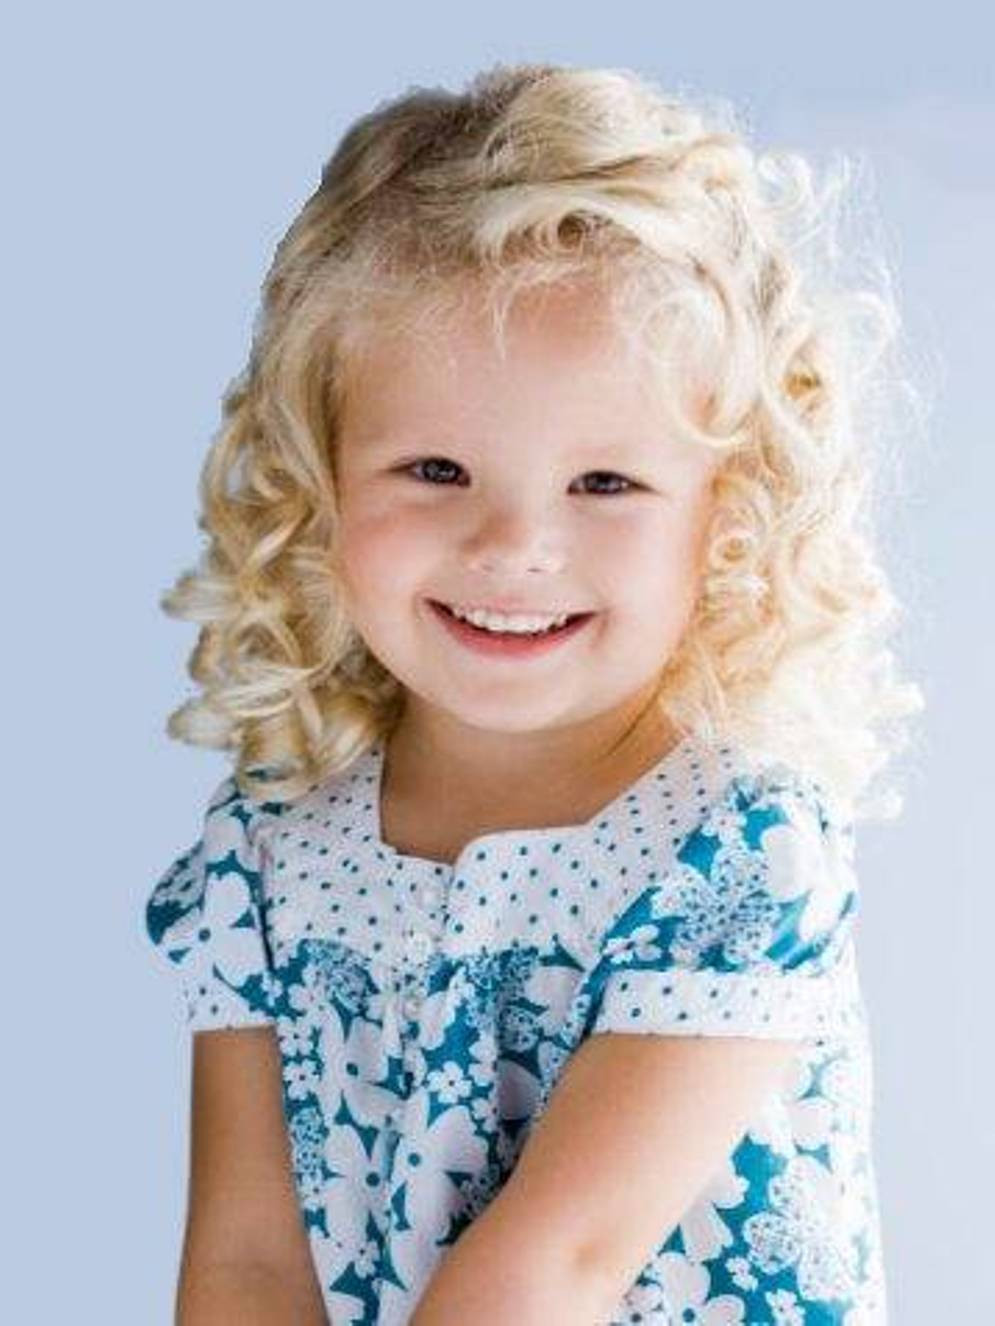 Girls Toddler Hairstyles
 Top Ten Back to School Kids Haircuts